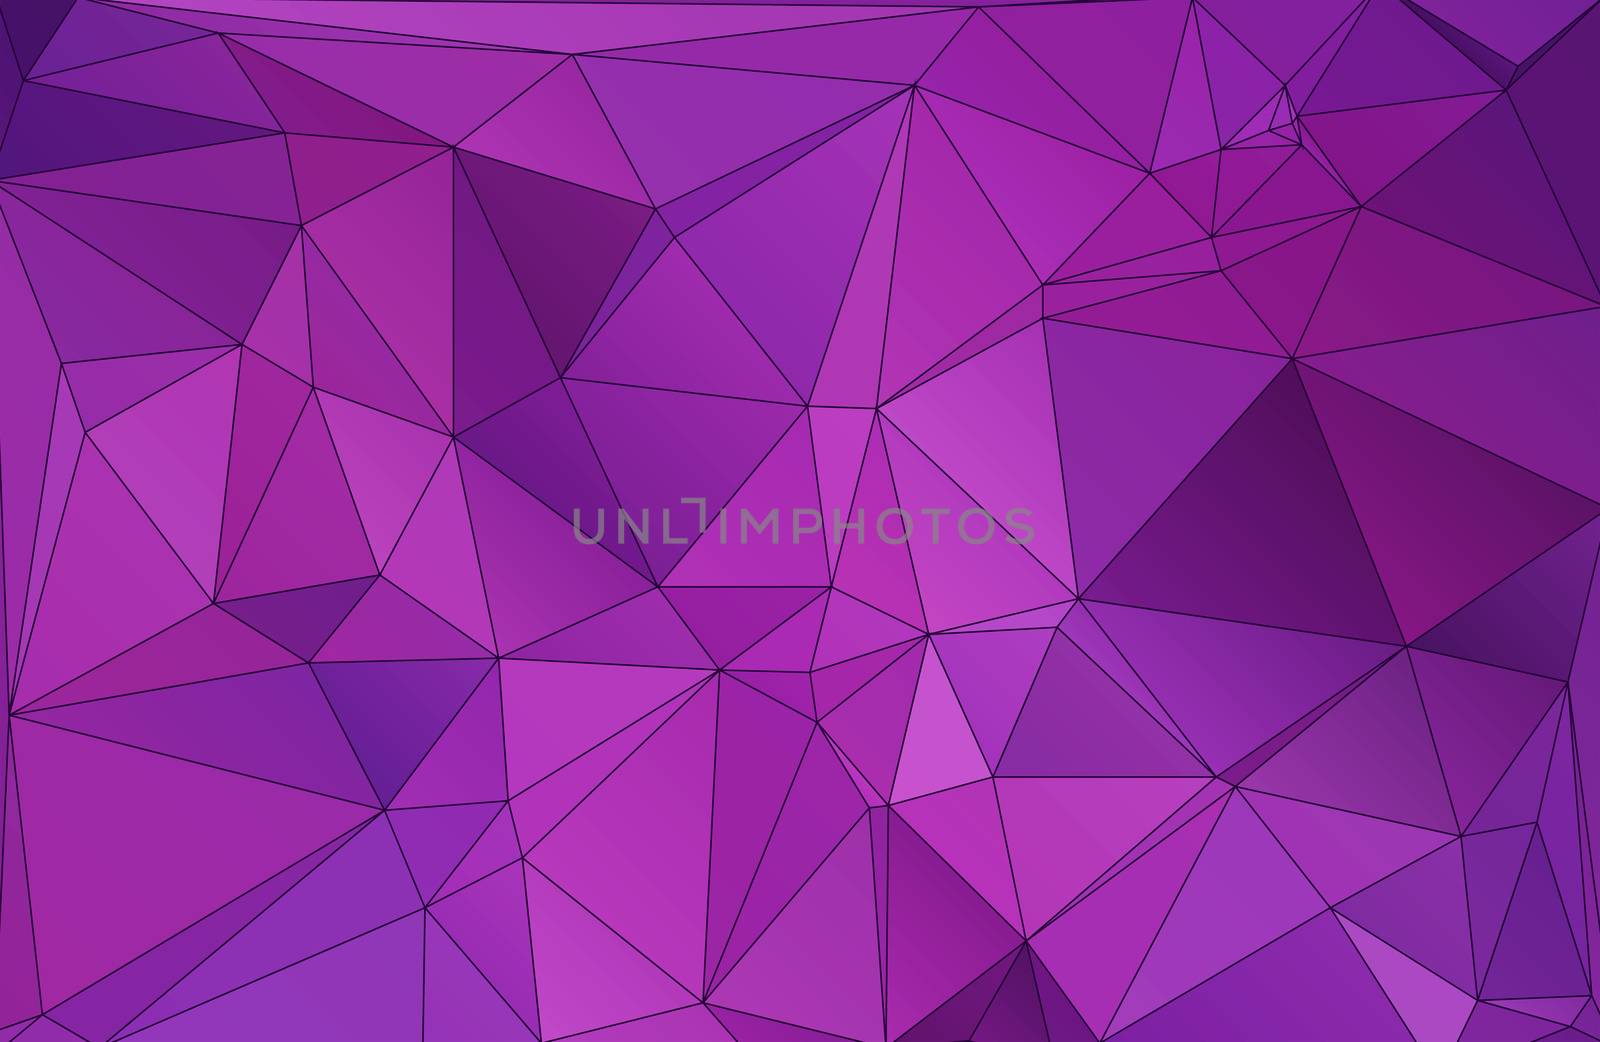 abstract pattern of triangles, seamless background polygonal